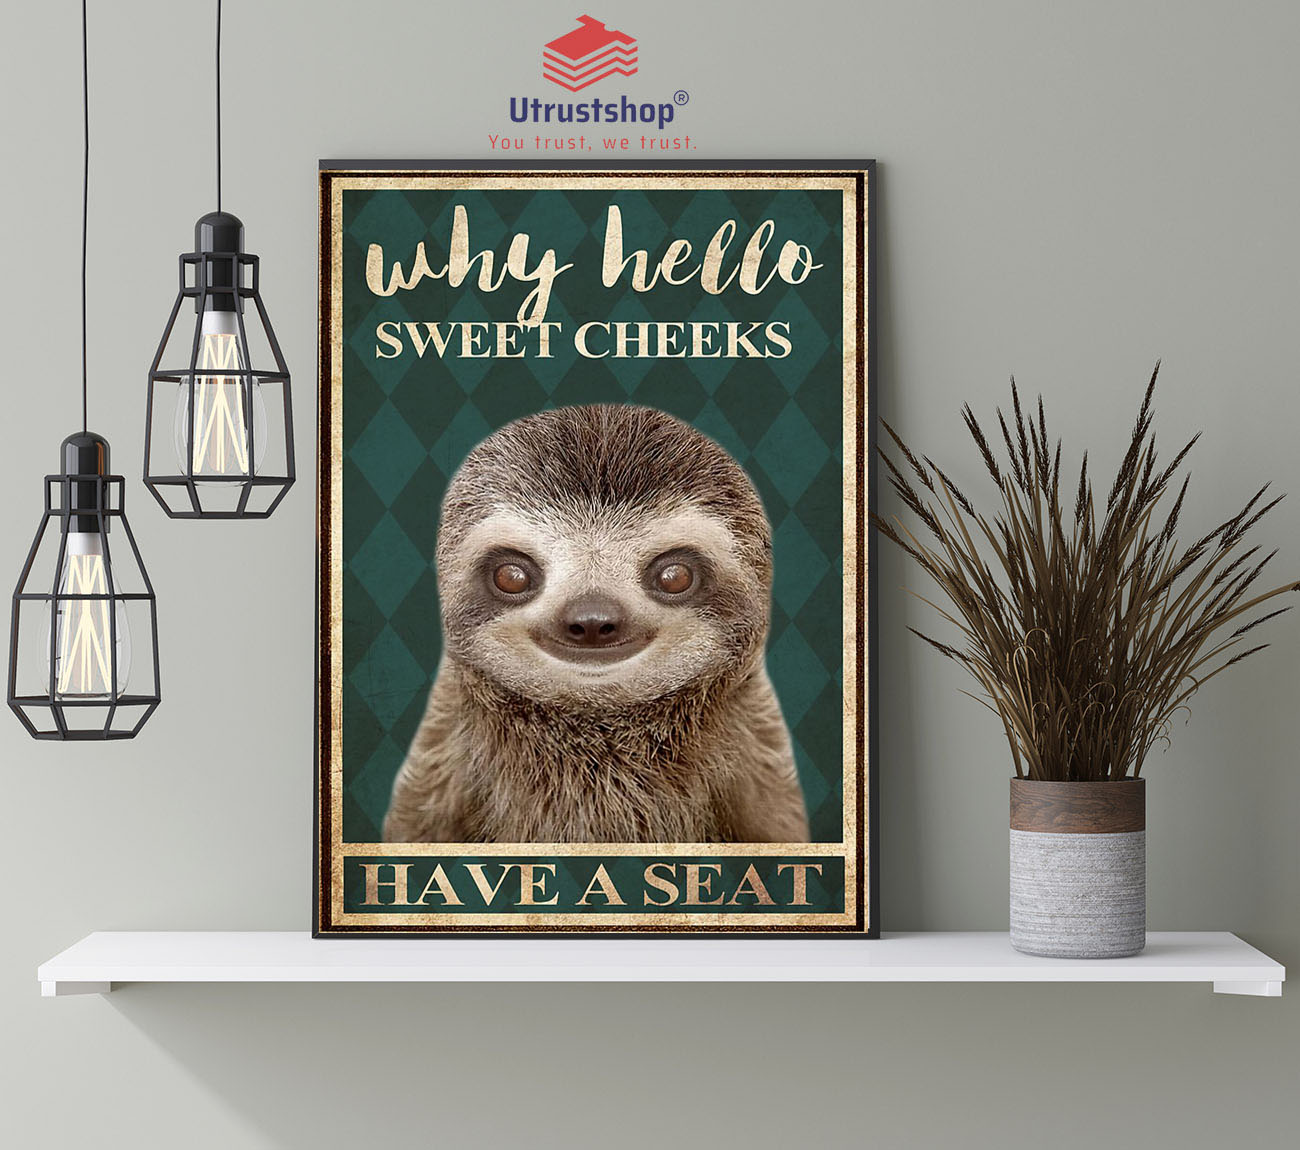 Sloth why hello sweet cheeks have a seat poster4